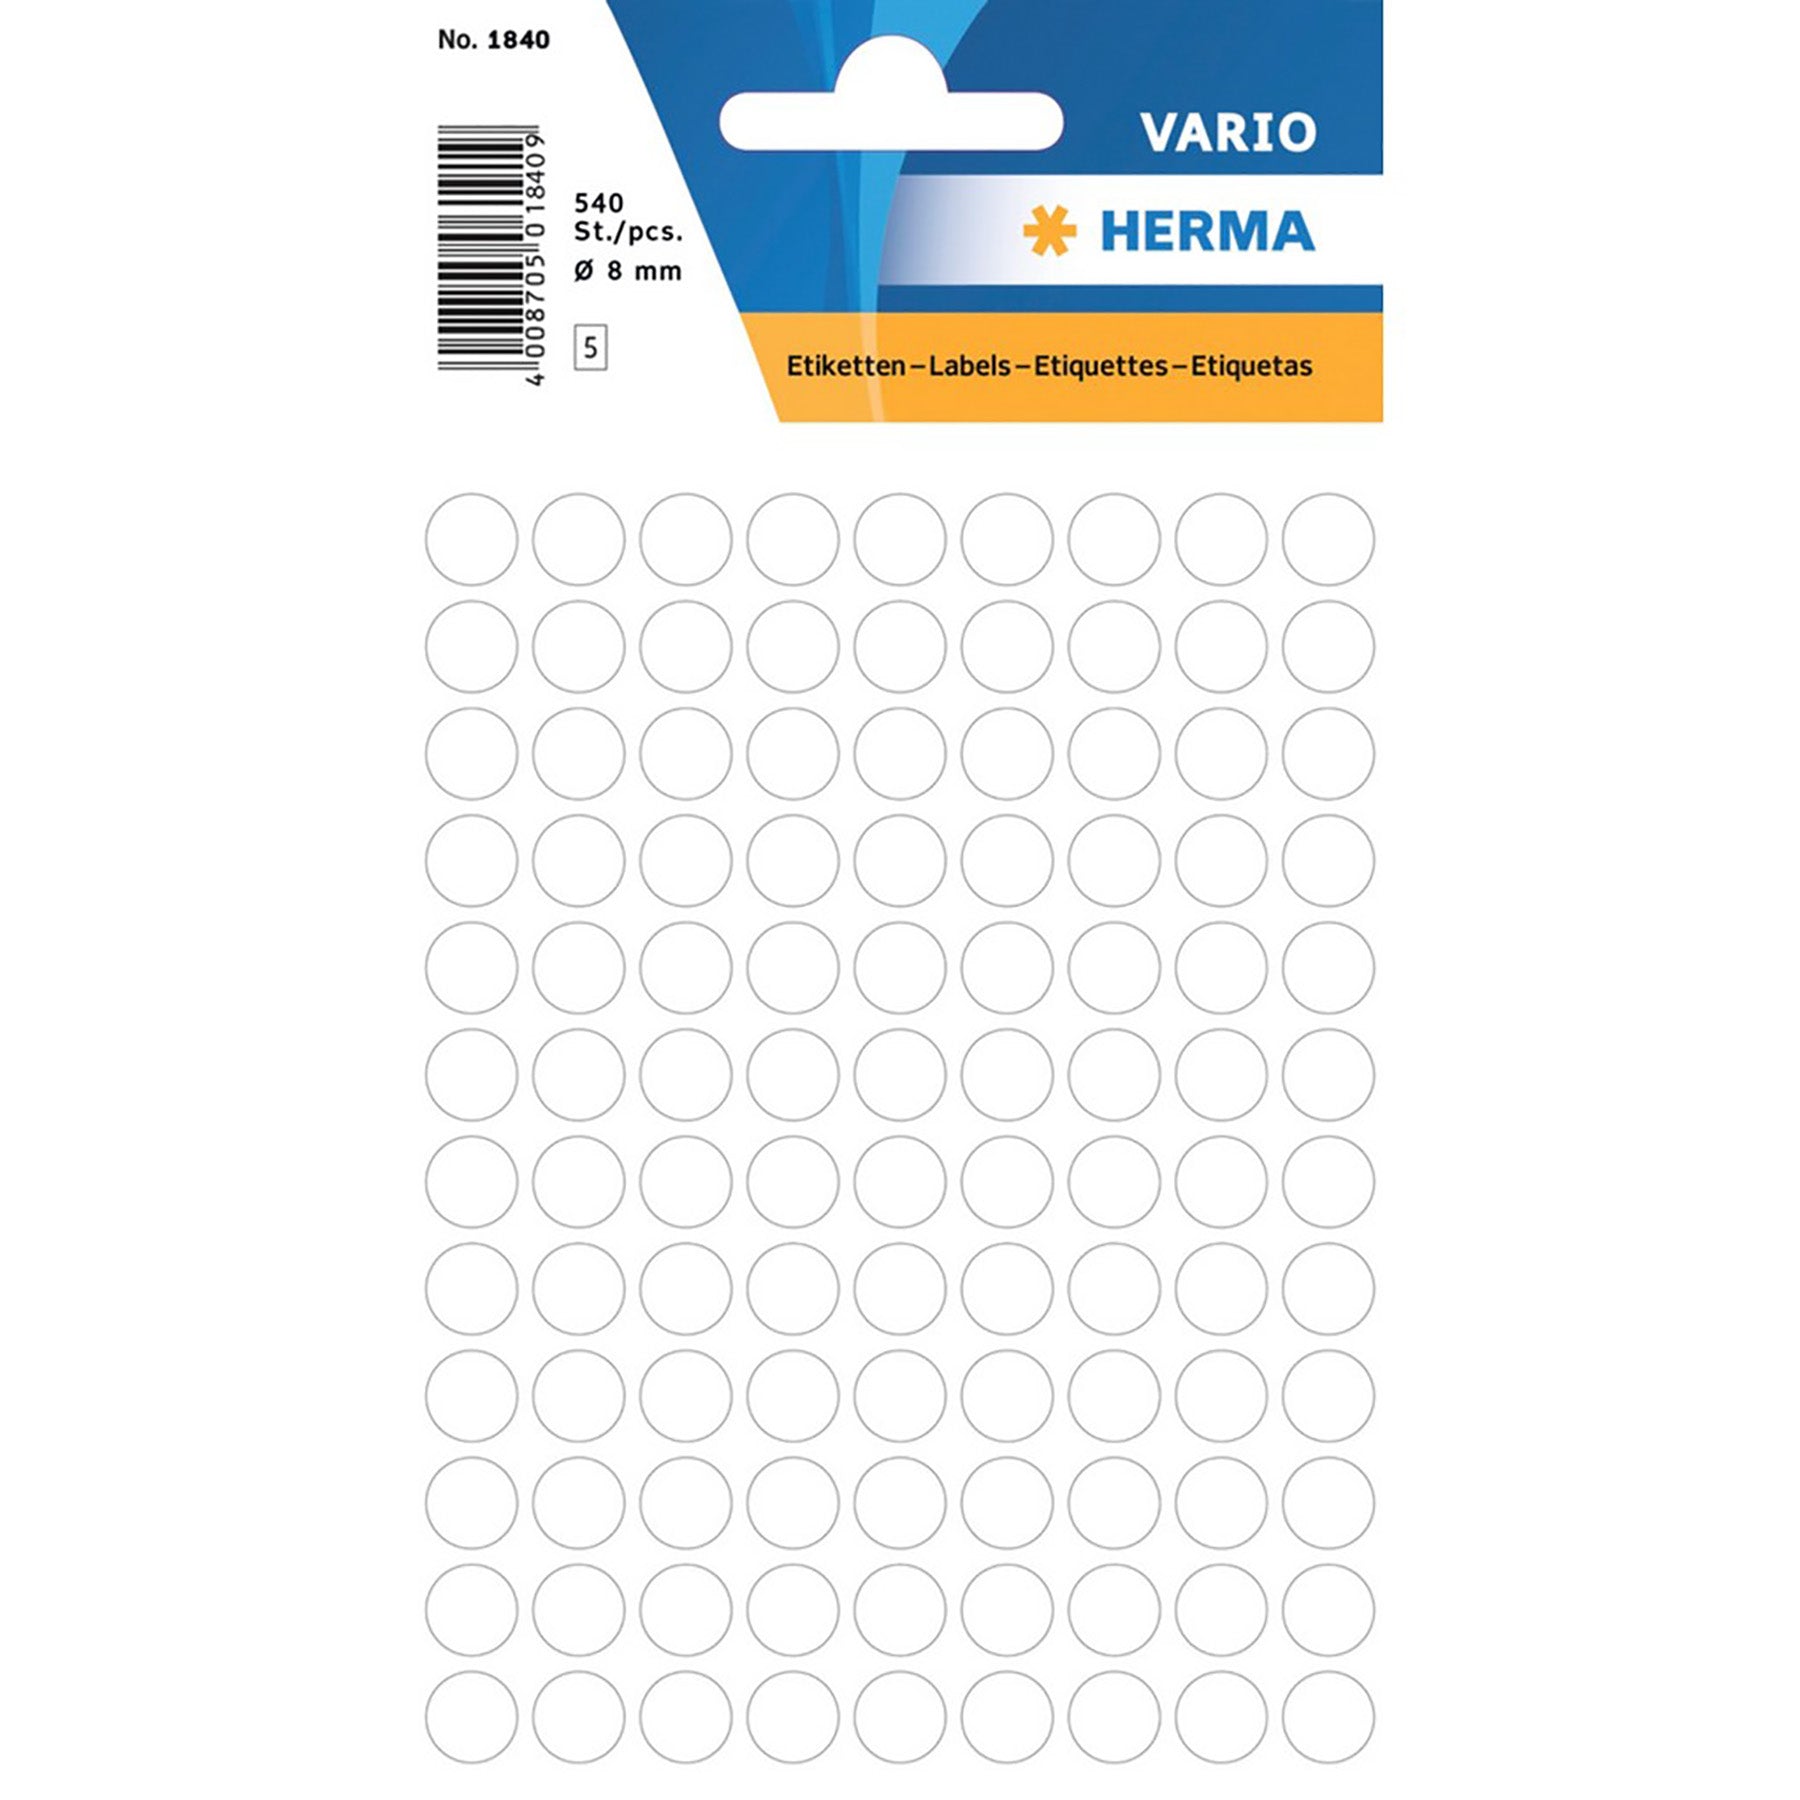 Herma Vario 5 Sheets Colour-Coding Round Labels Dots, White 0.31in